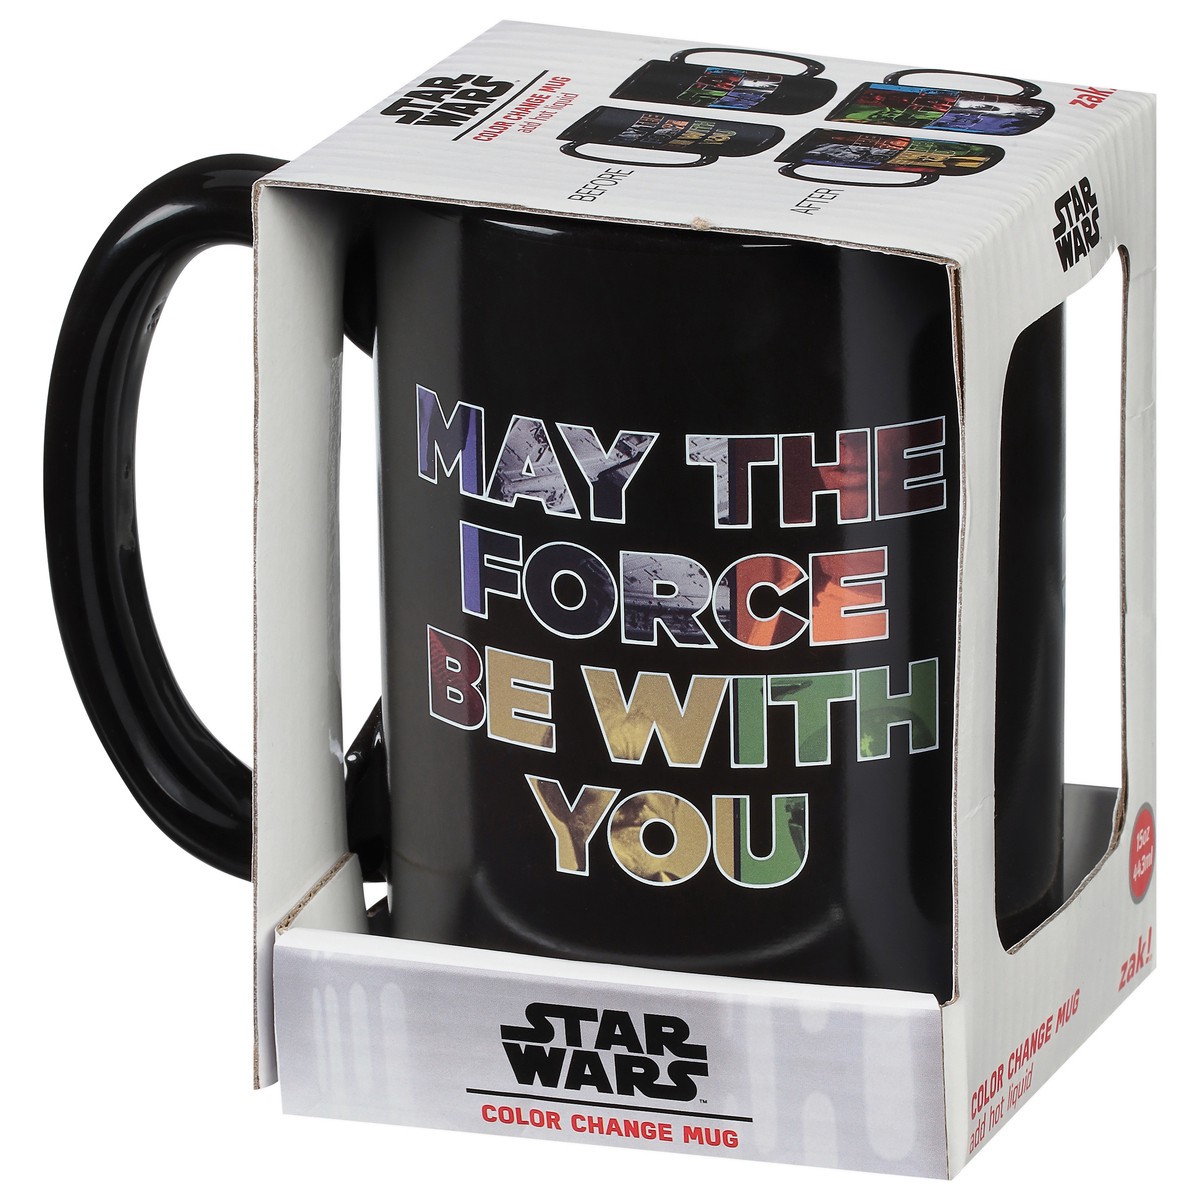 Zak! Star Wars Color Change Mug 15 oz Disney May The Force Be With You New